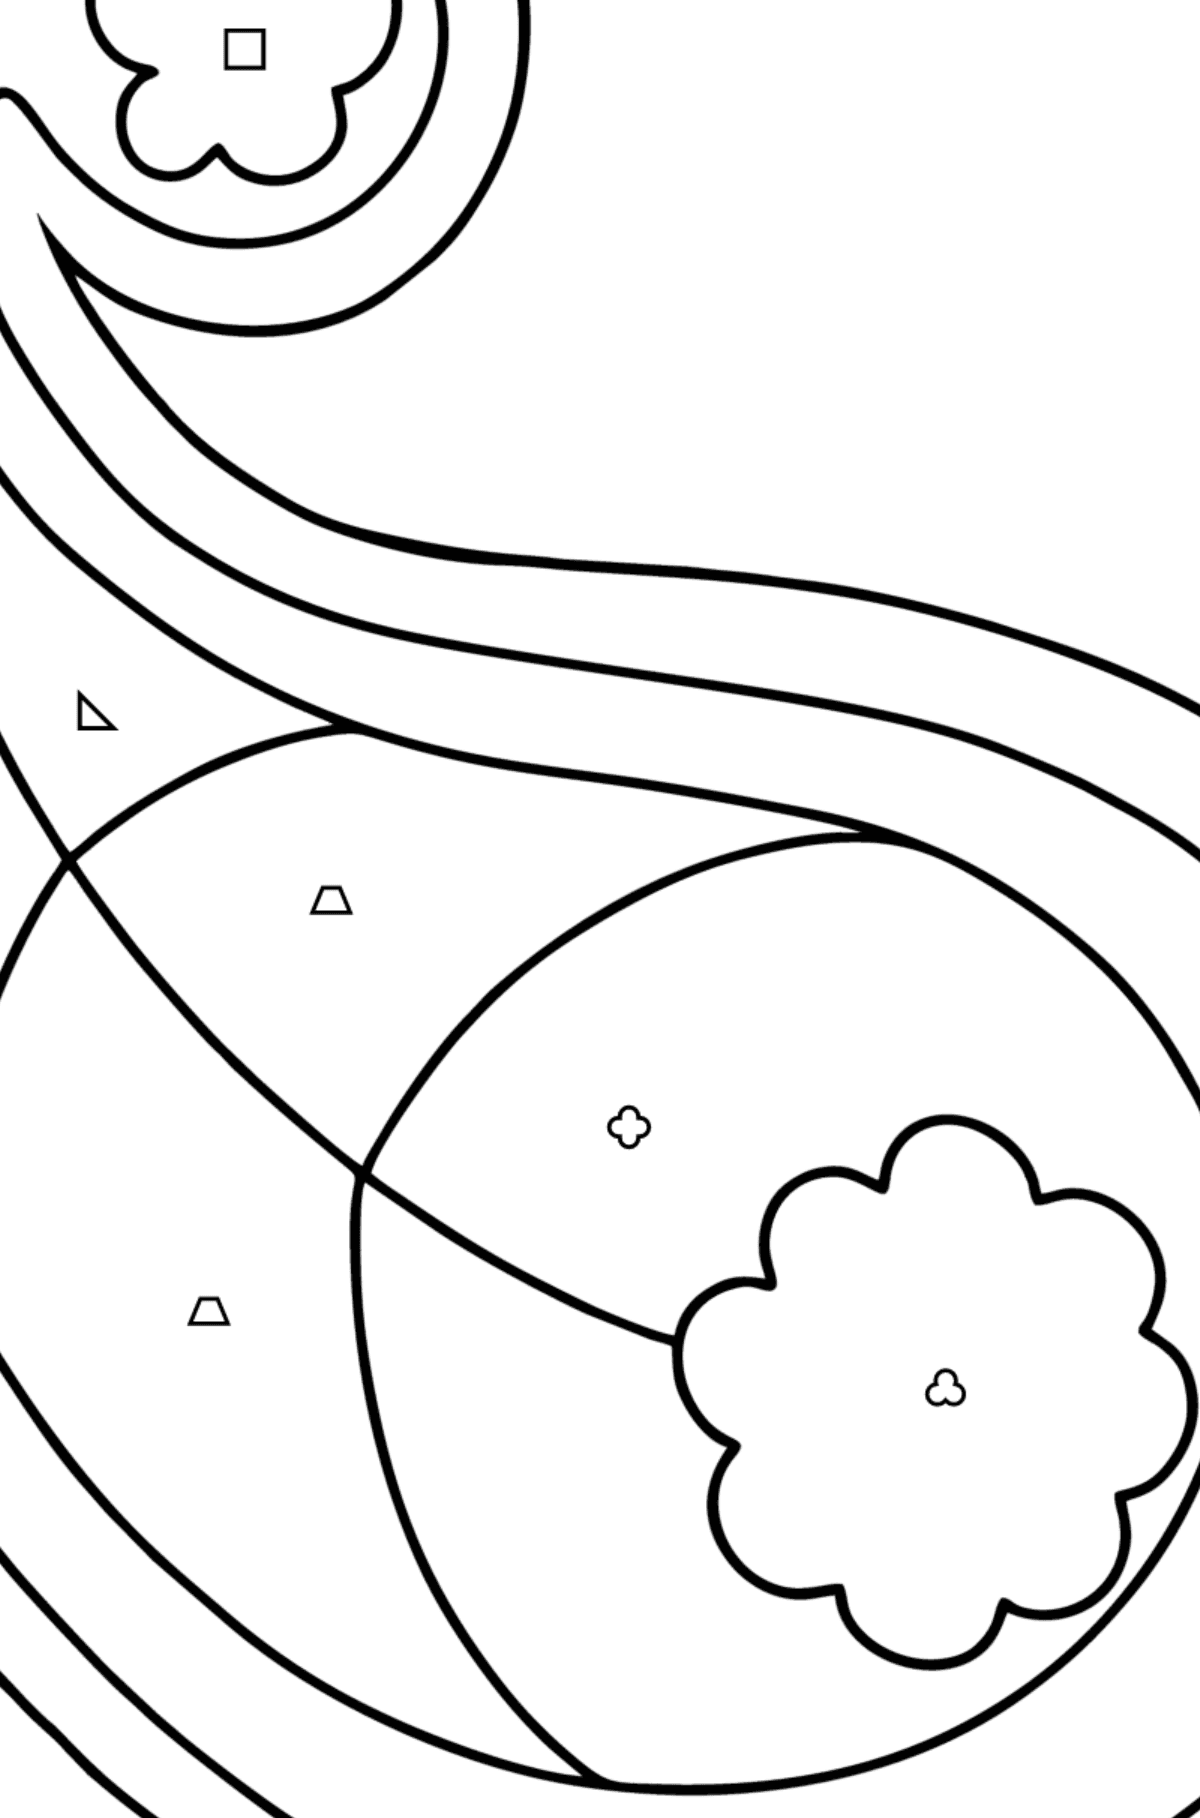 Simple Paisley coloring page - Coloring by Geometric Shapes for Kids